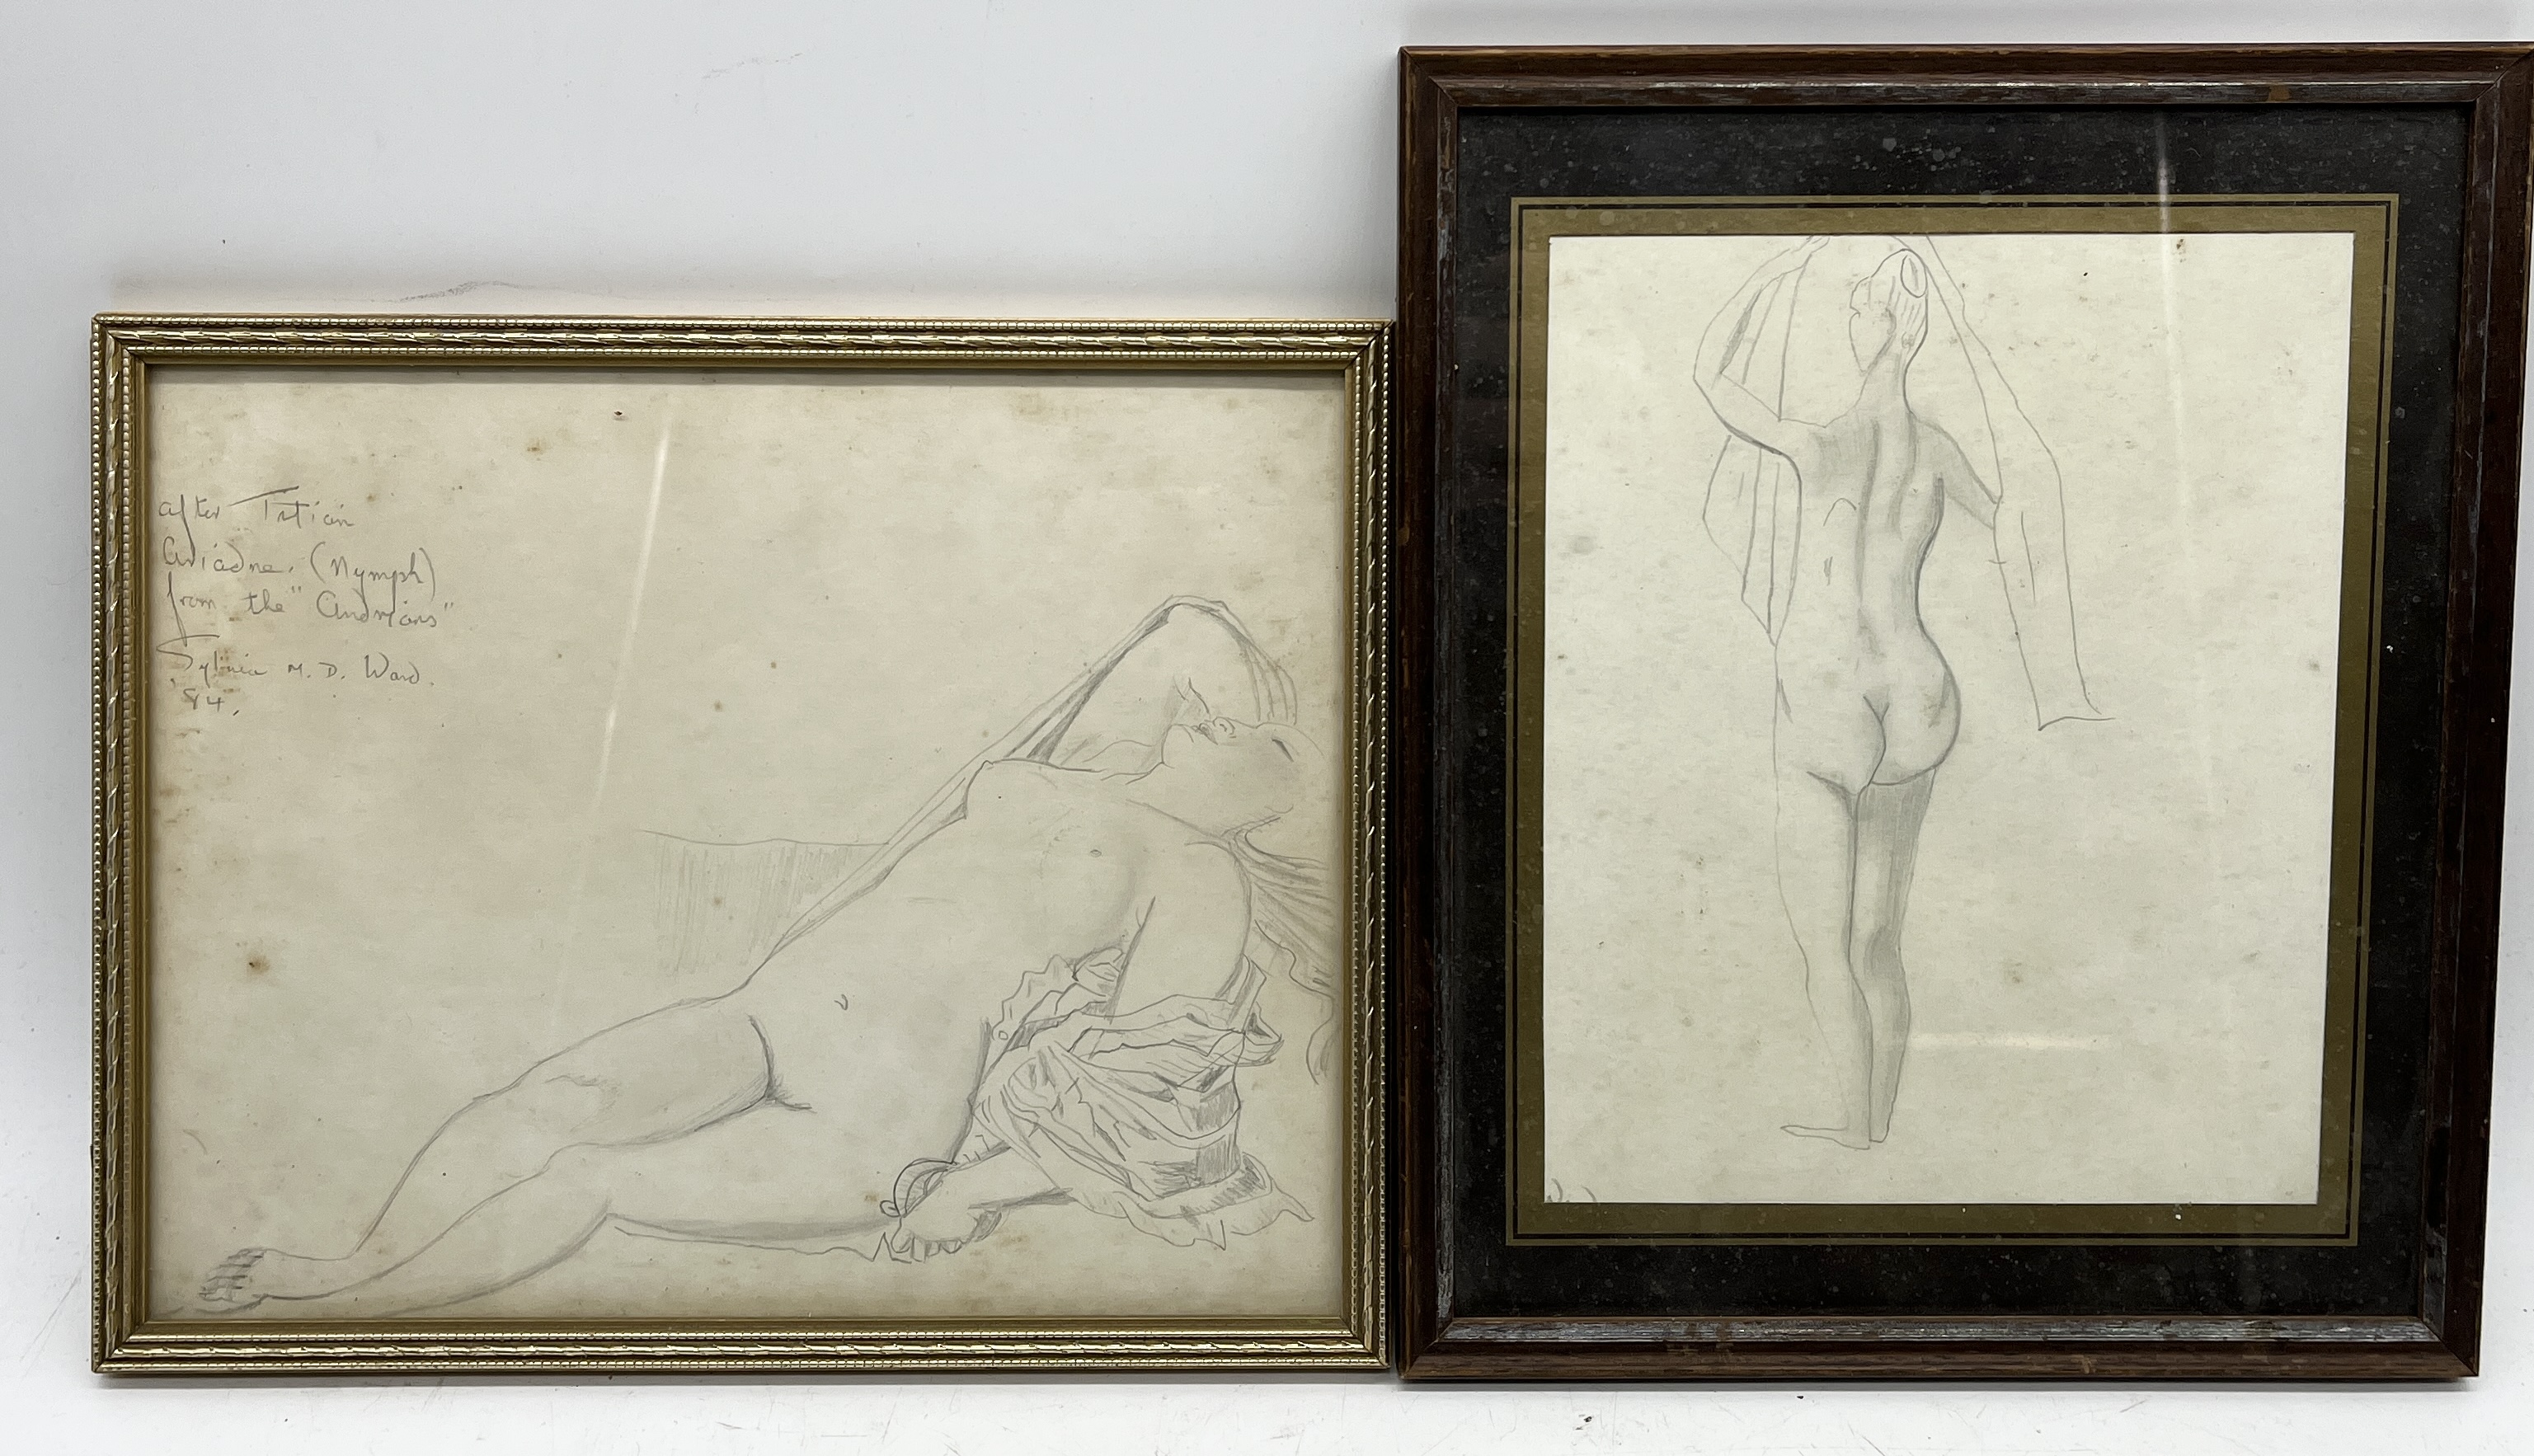 Two small pencil sketches showing nude figures by Sylvia M Dixon Ward, both signed and described